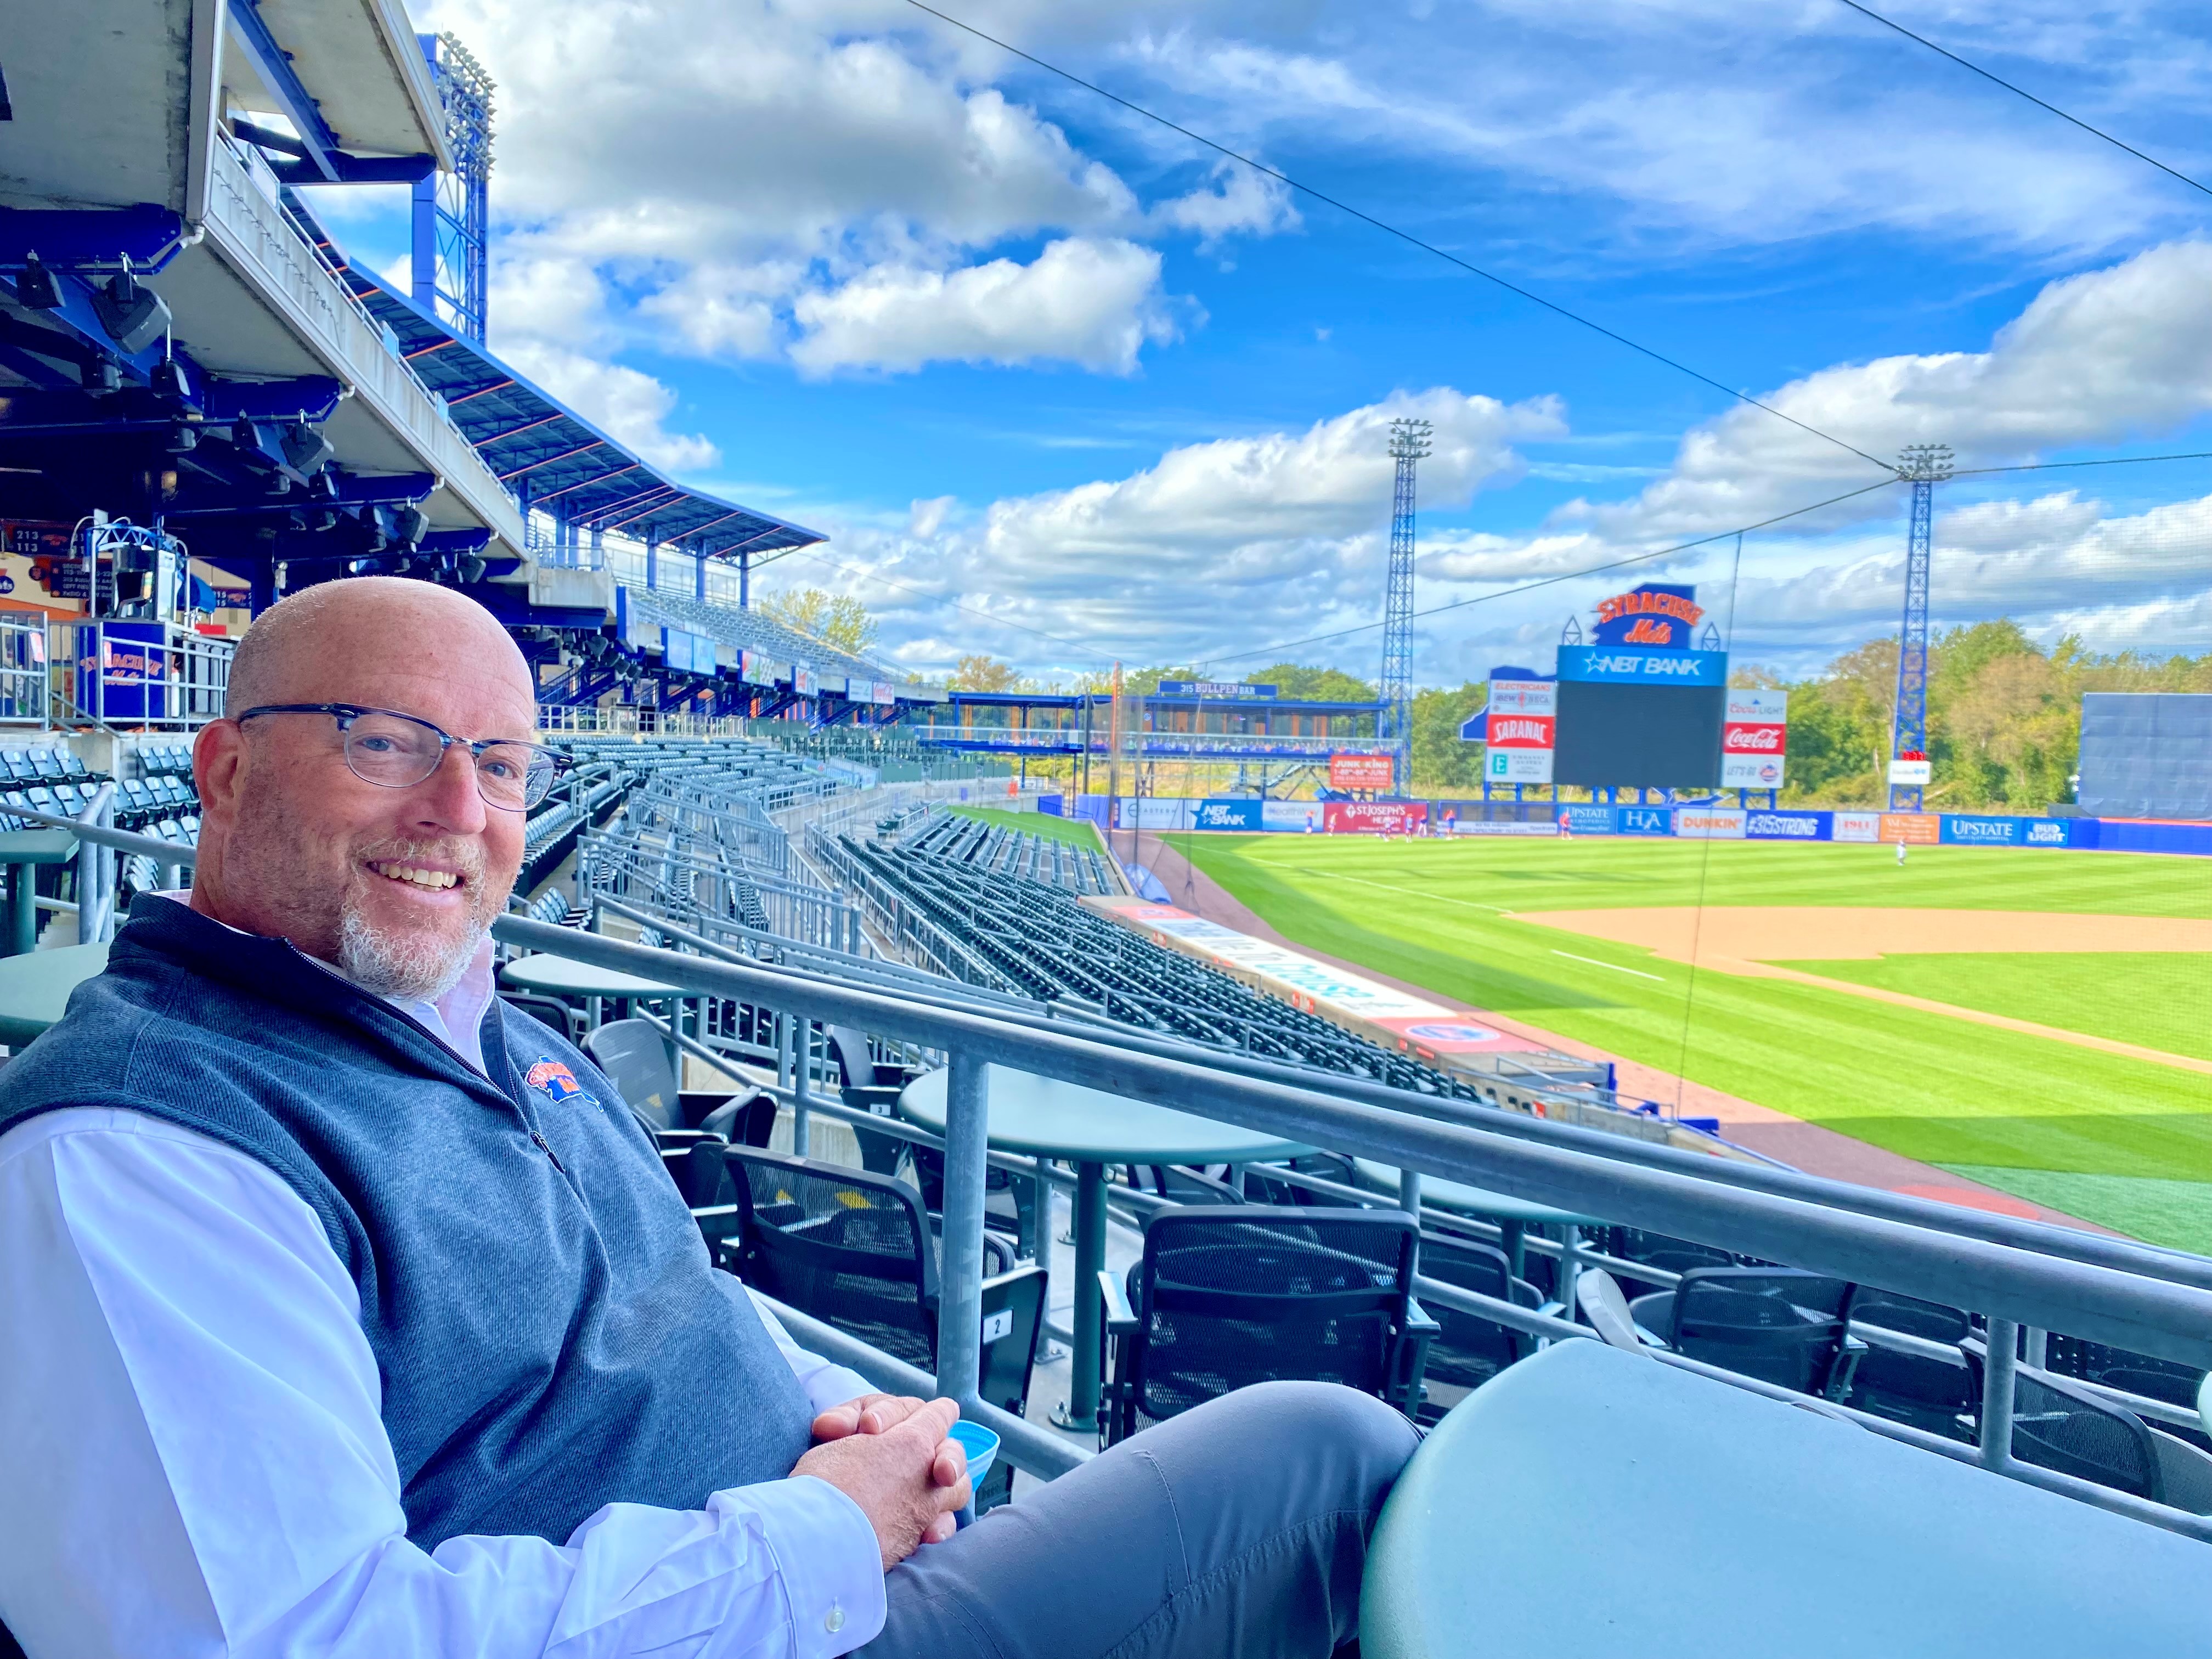 Mets 2022 Promotional Schedule Tours, Tickets, Promotions: Syracuse Mets To Preview 2022 Season At Open  House - Syracuse.com